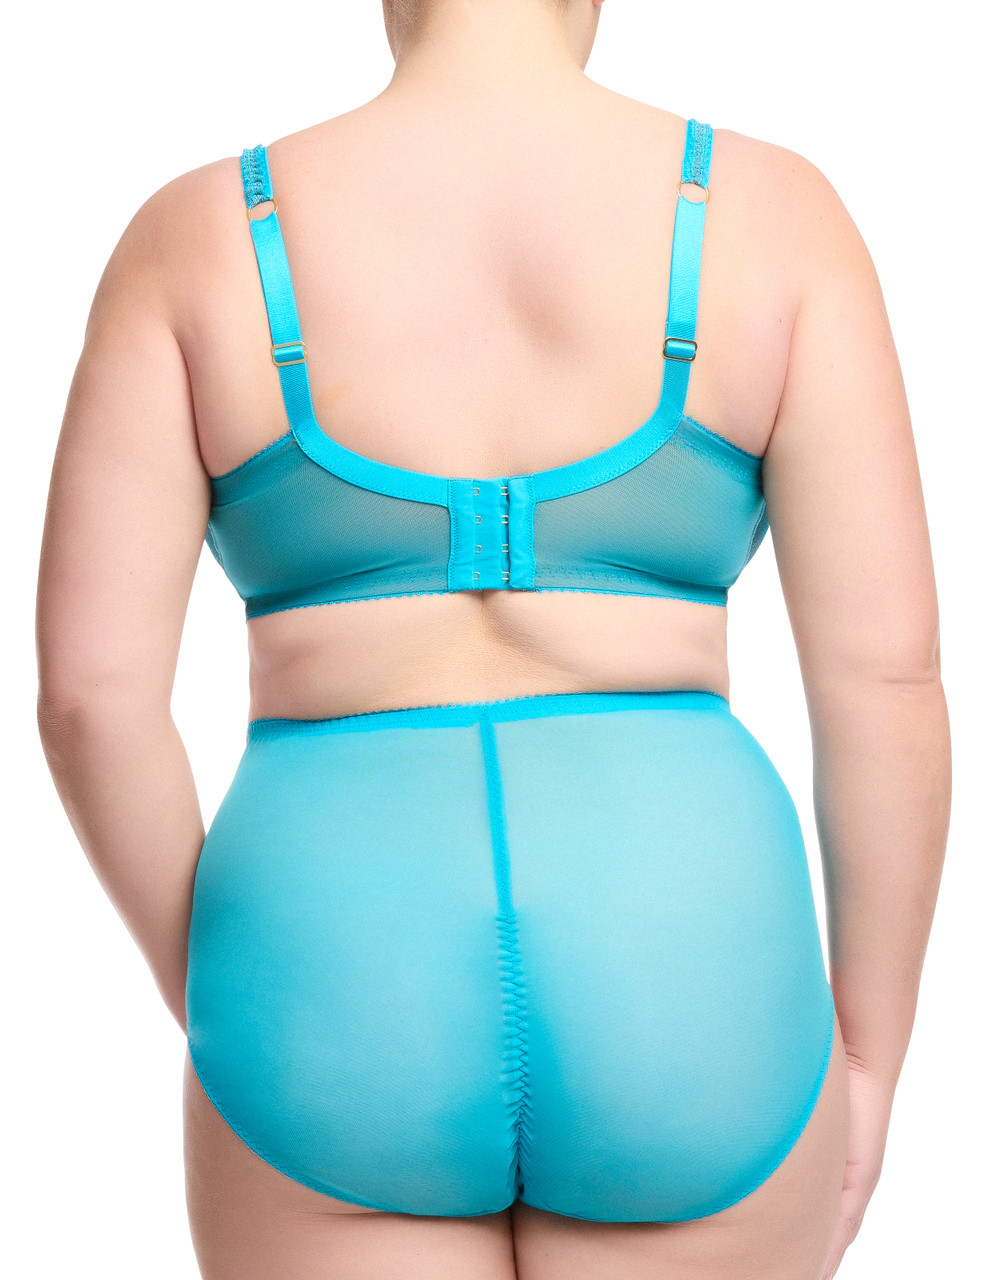 Dita von Teese Savoir Faire Full Figure Underwire Molded Bra in Turquoise  FINAL SALE (40% Off) - Busted Bra Shop